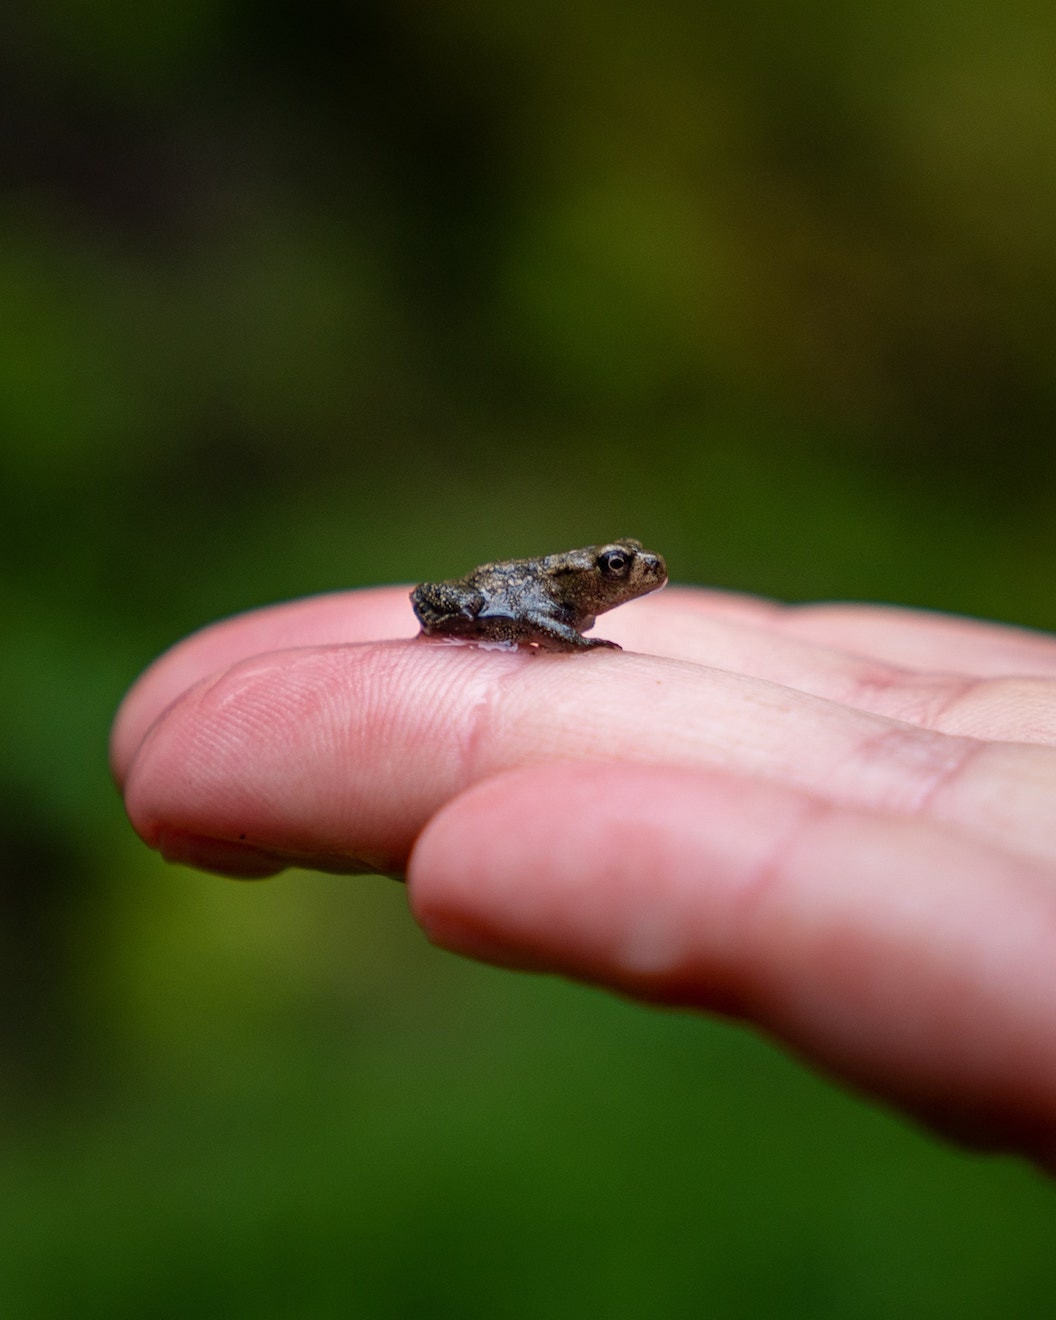 Picture shows a tiny frog resting on someones hand. In the background is blurred greenery. 